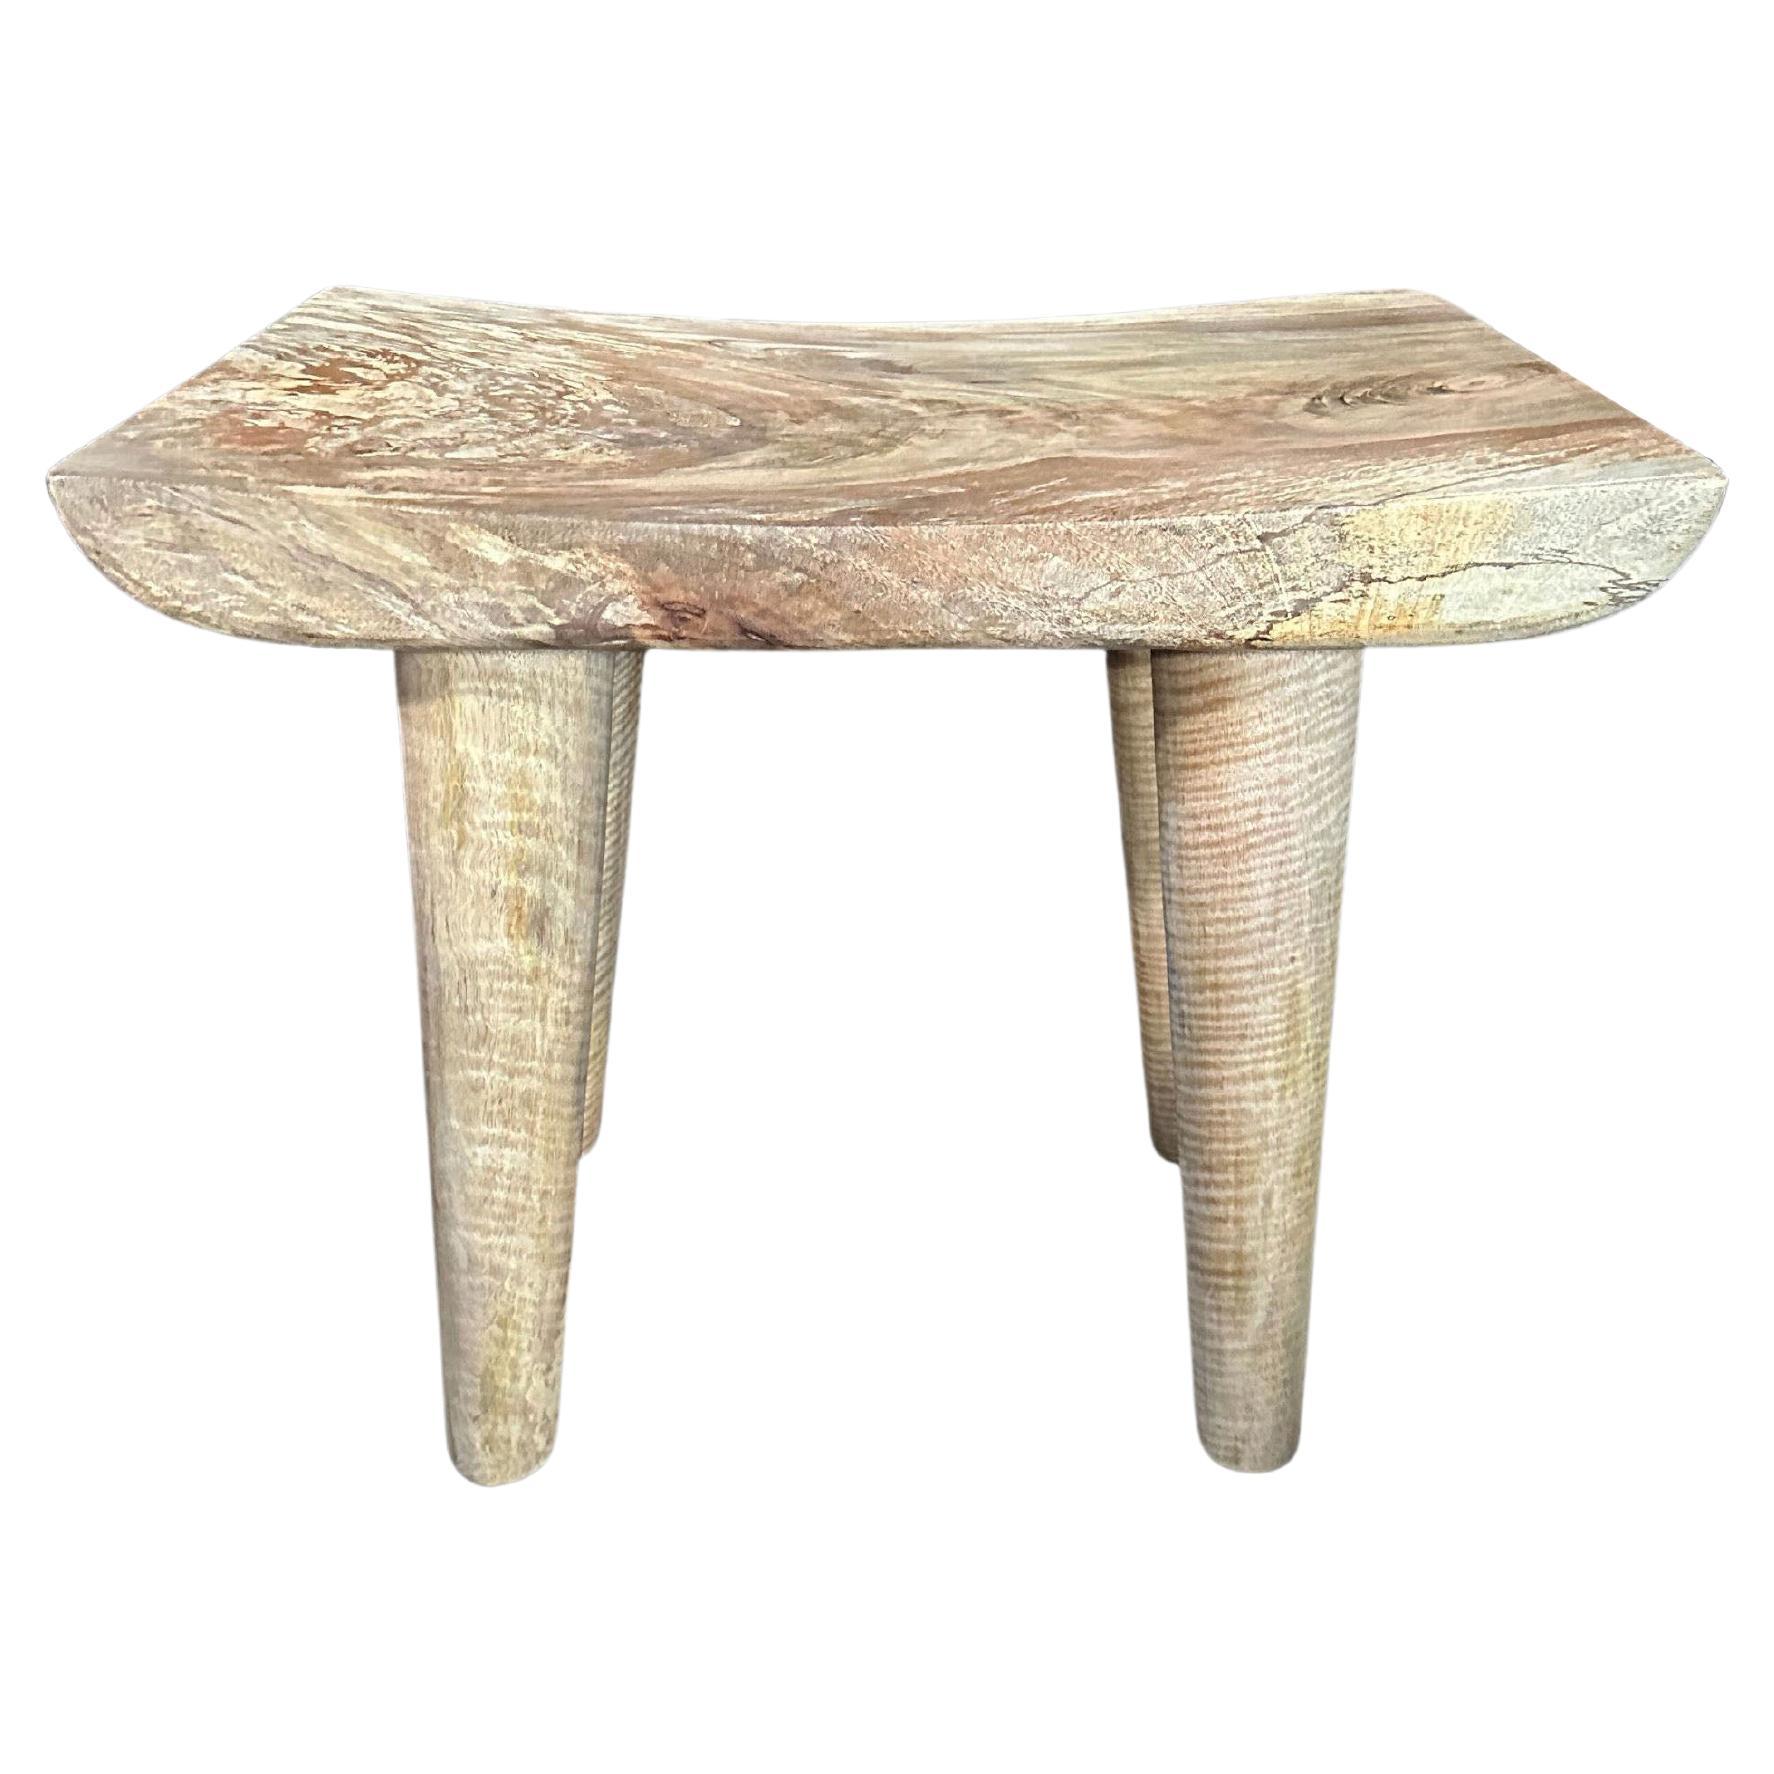 Sculptural Mango Wood Stool with Curved Seat, Natural Finish For Sale